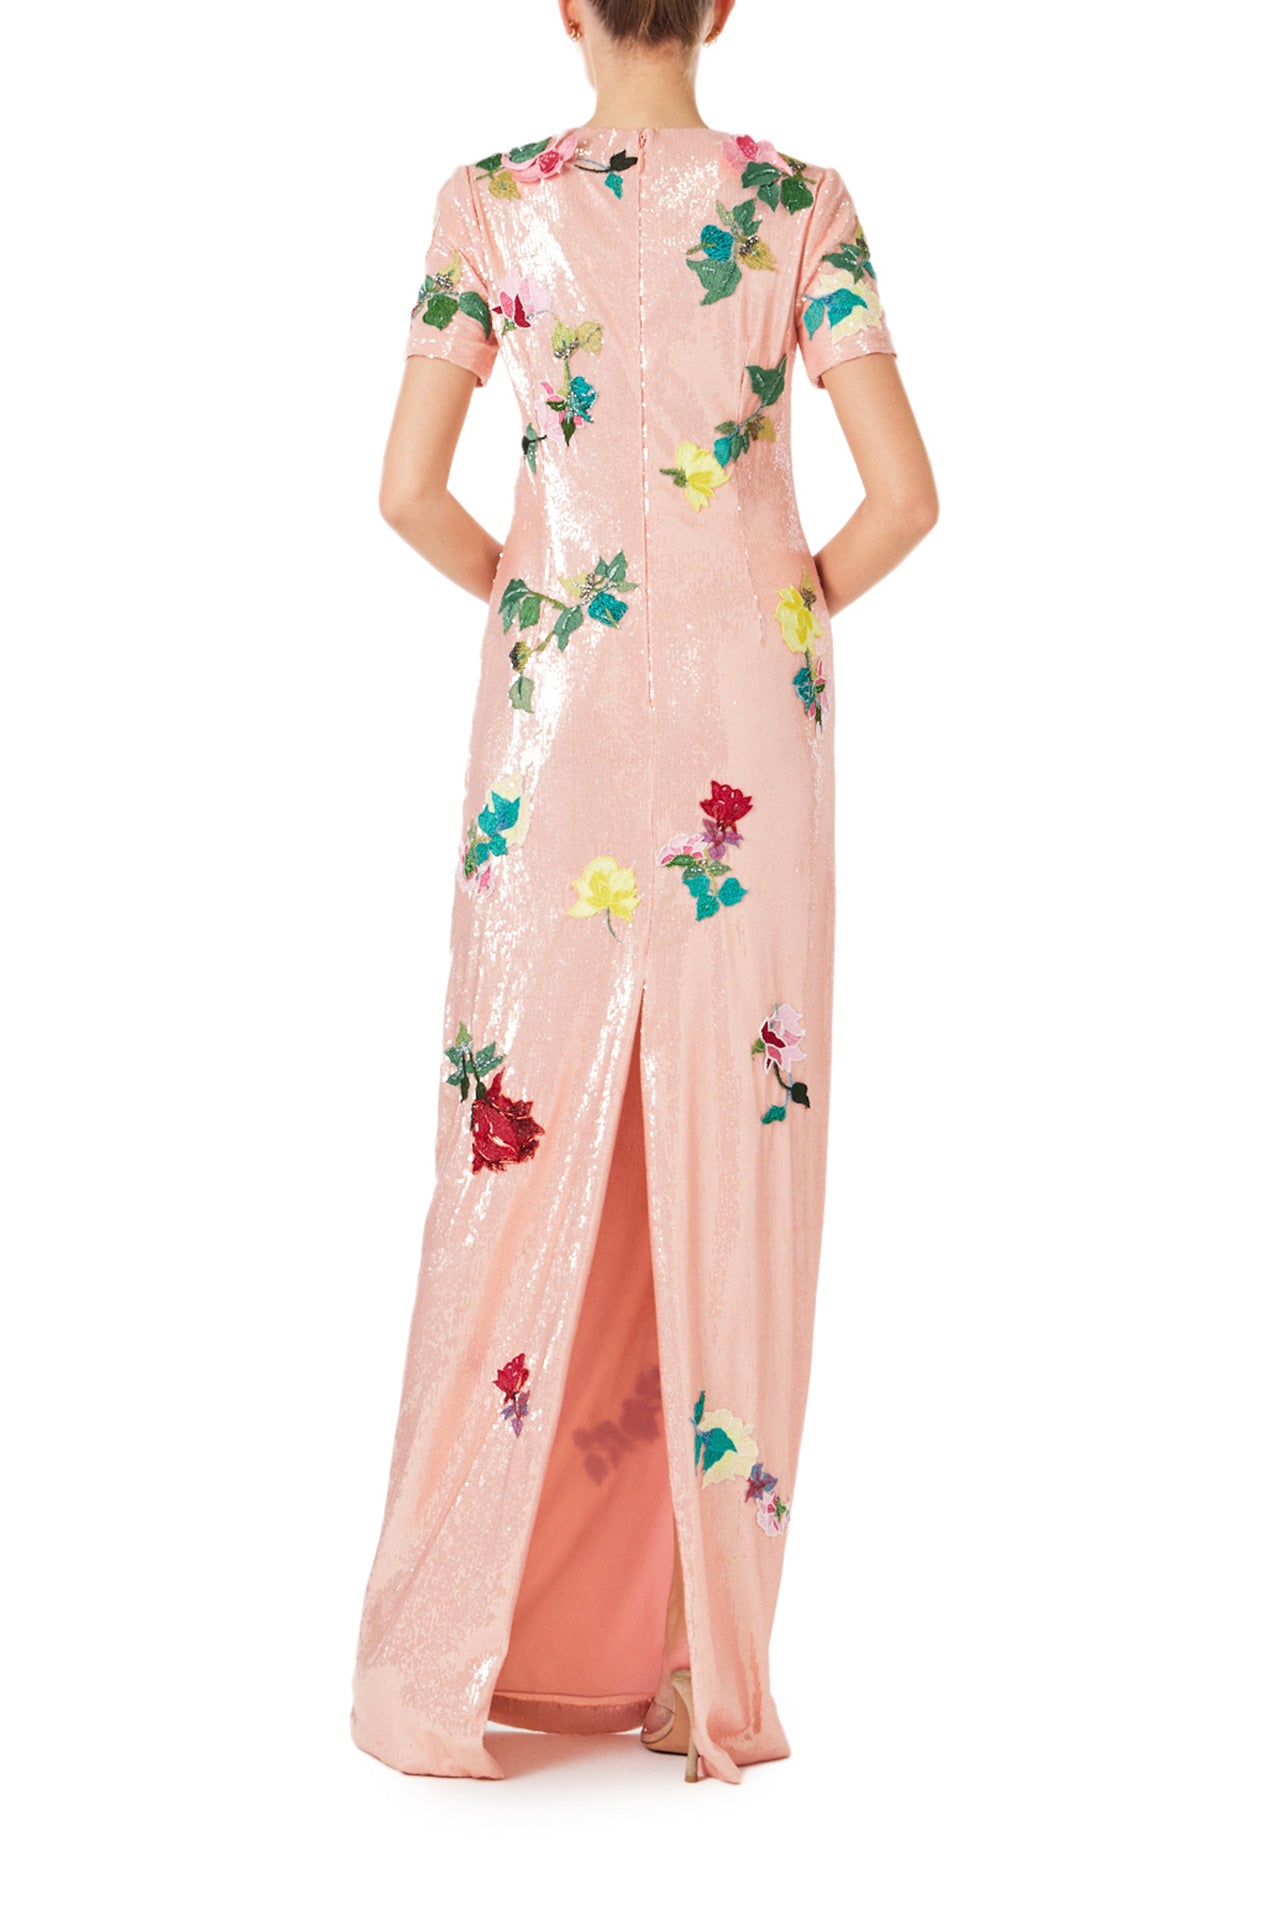 Monique Lhuillier Spring 2024 melon colored sequin gown with short sleeves, jewel neckline and multi-color floral embroidery - back.